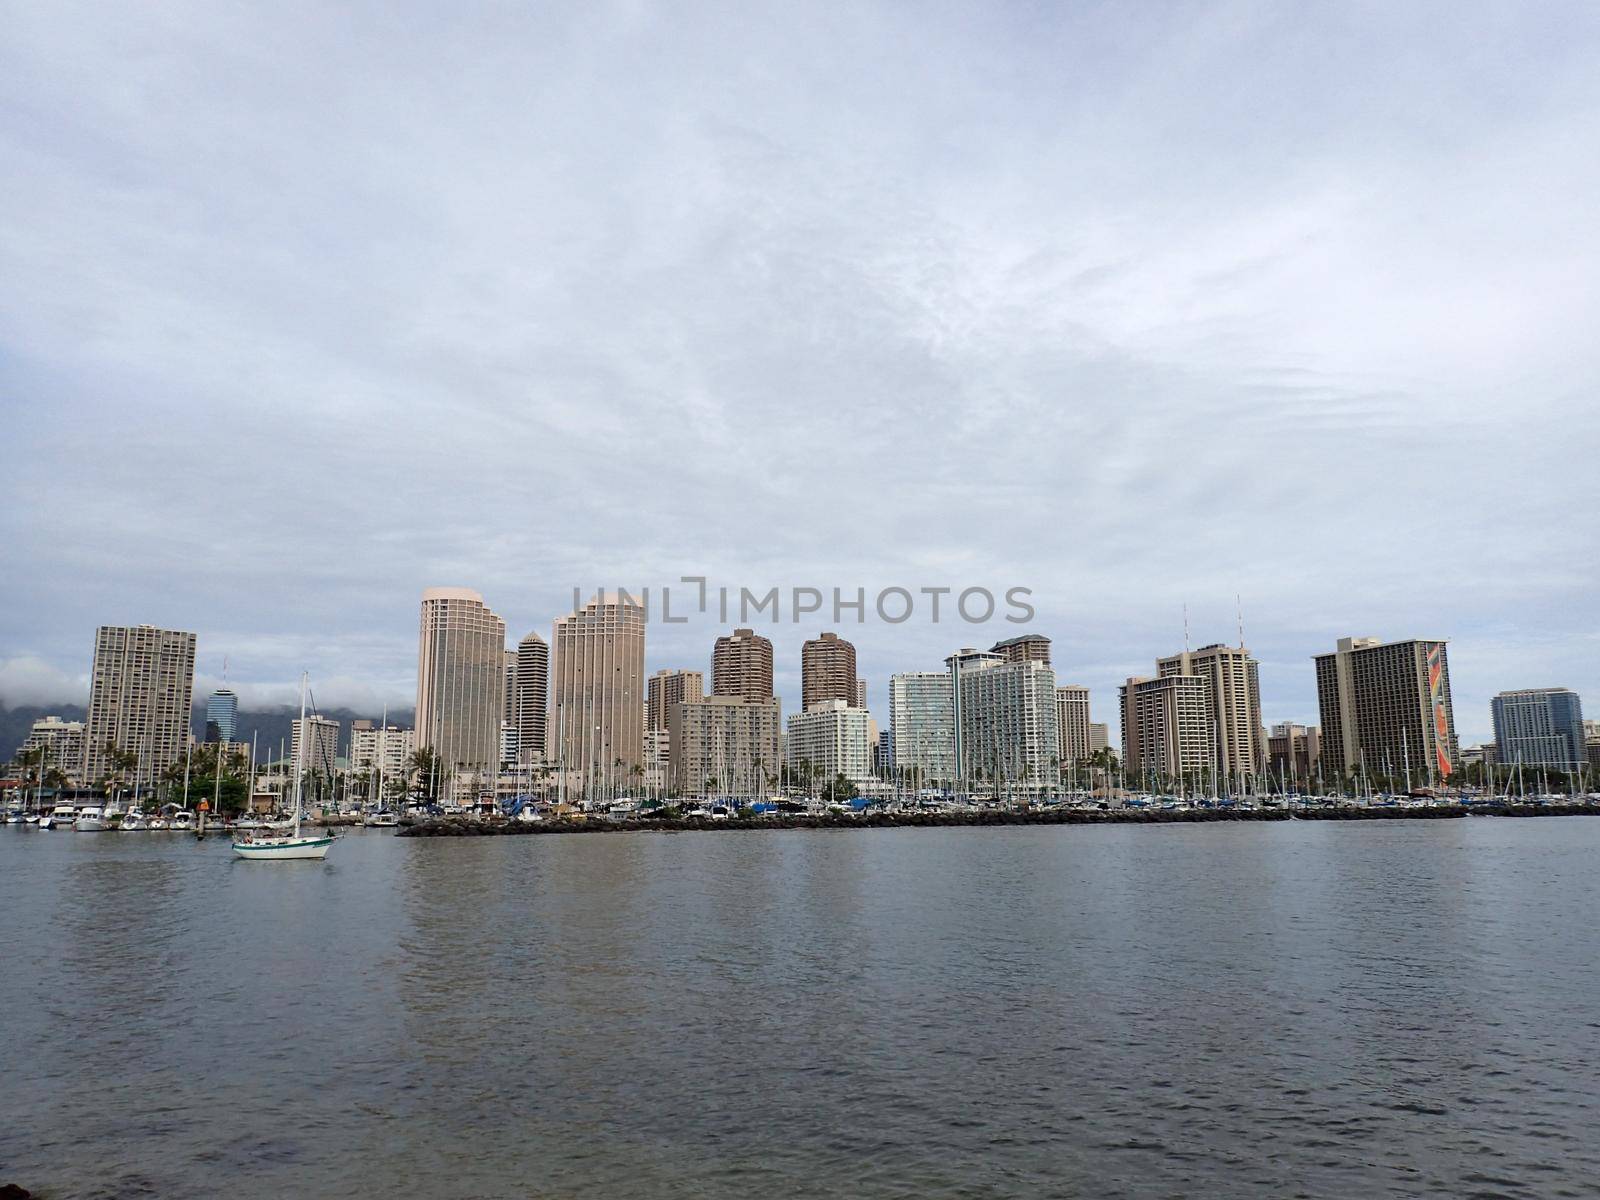 Honolulu - February 23, 2018:  Boat sails by Ala Wai Boat Harbor, and Waikiki Hotels during a beautiful day with clouds on the island of Oahu, Hawaii.